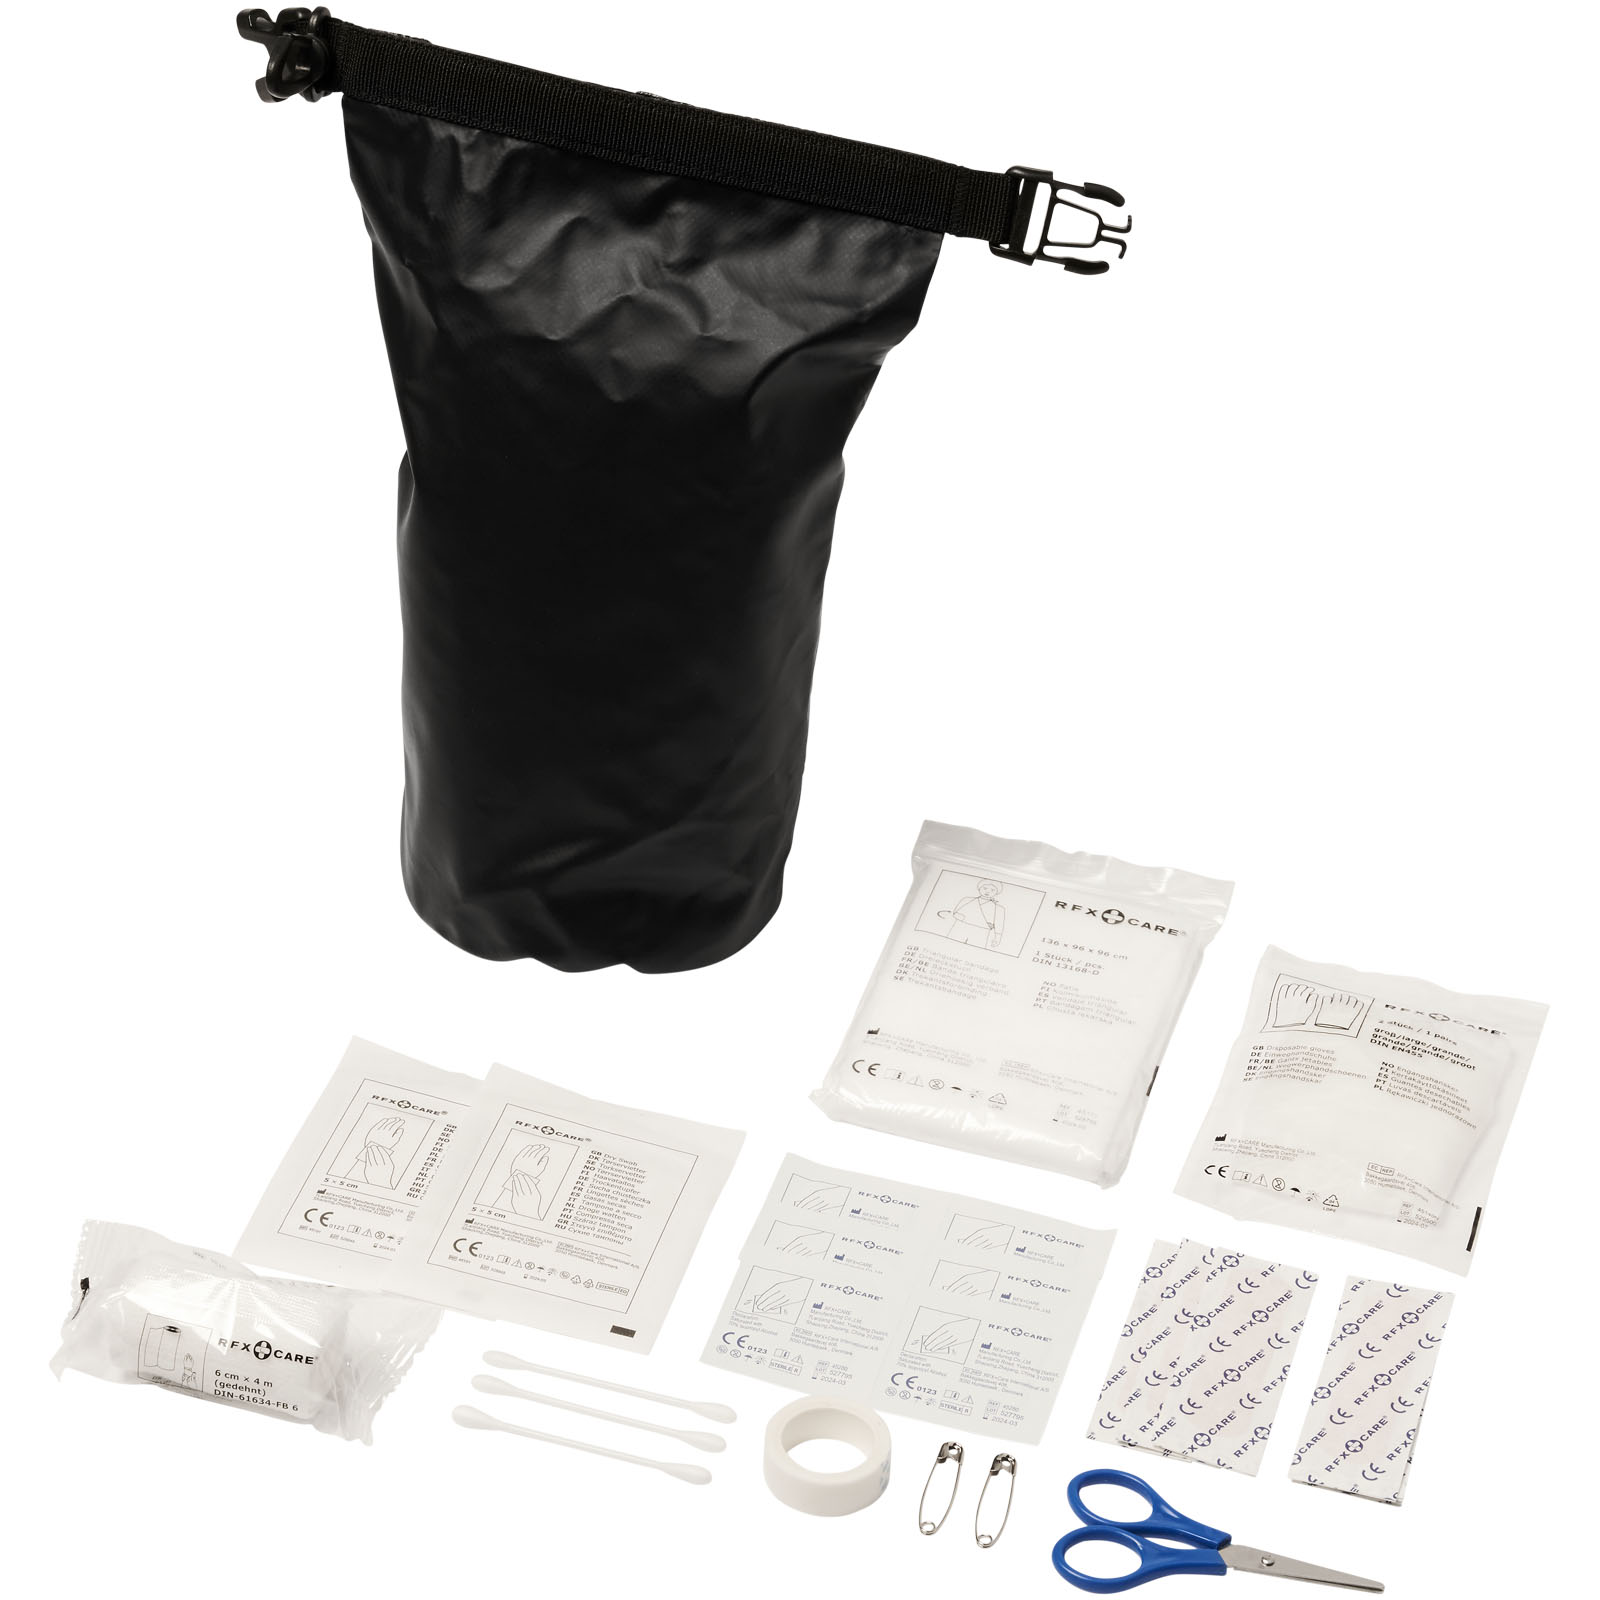 Health & Personal Care - Alexander 30-piece first aid waterproof bag